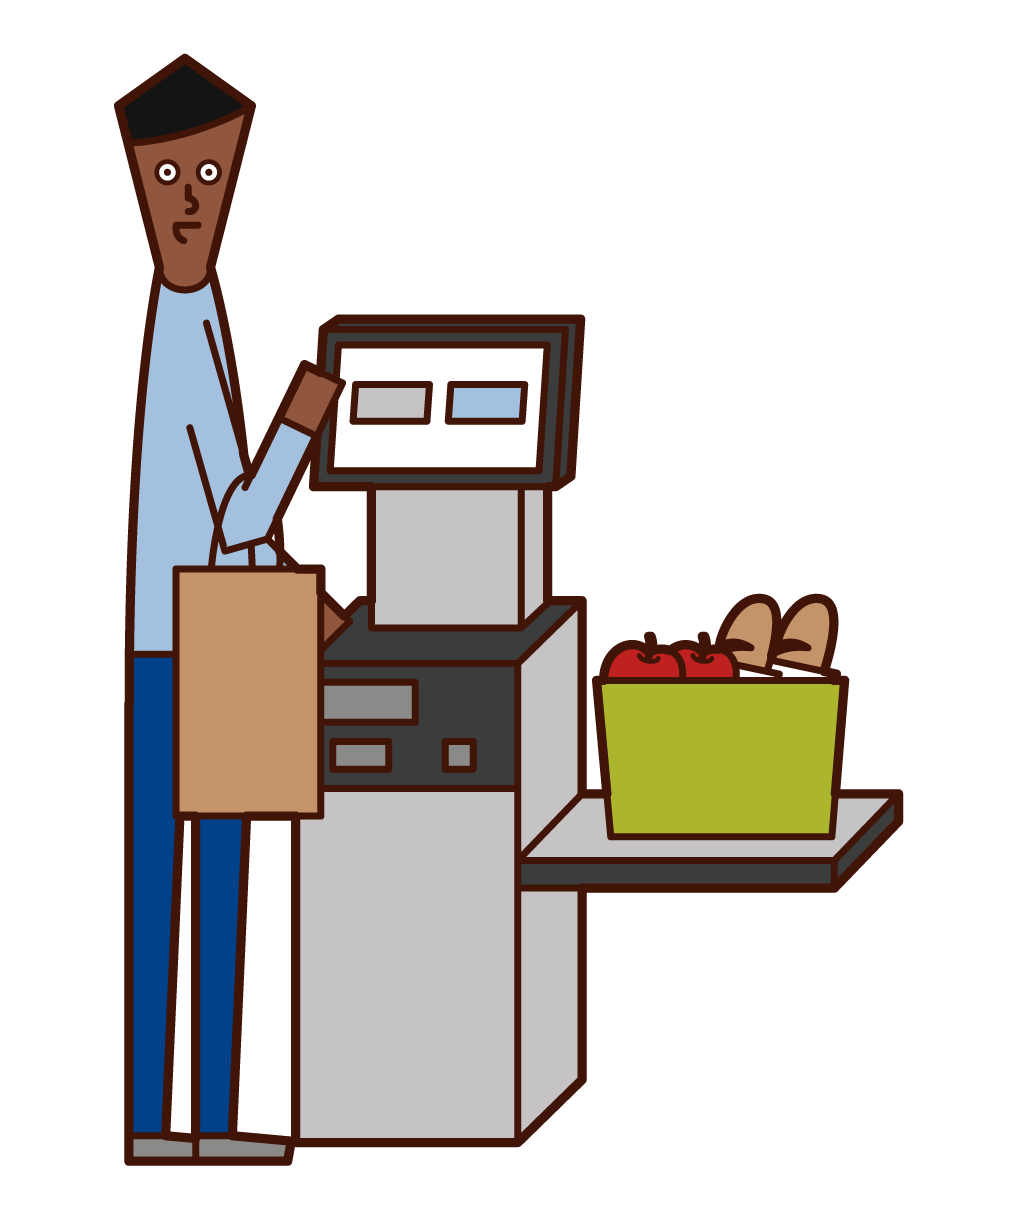 Illustration of a man accounting at a self-register